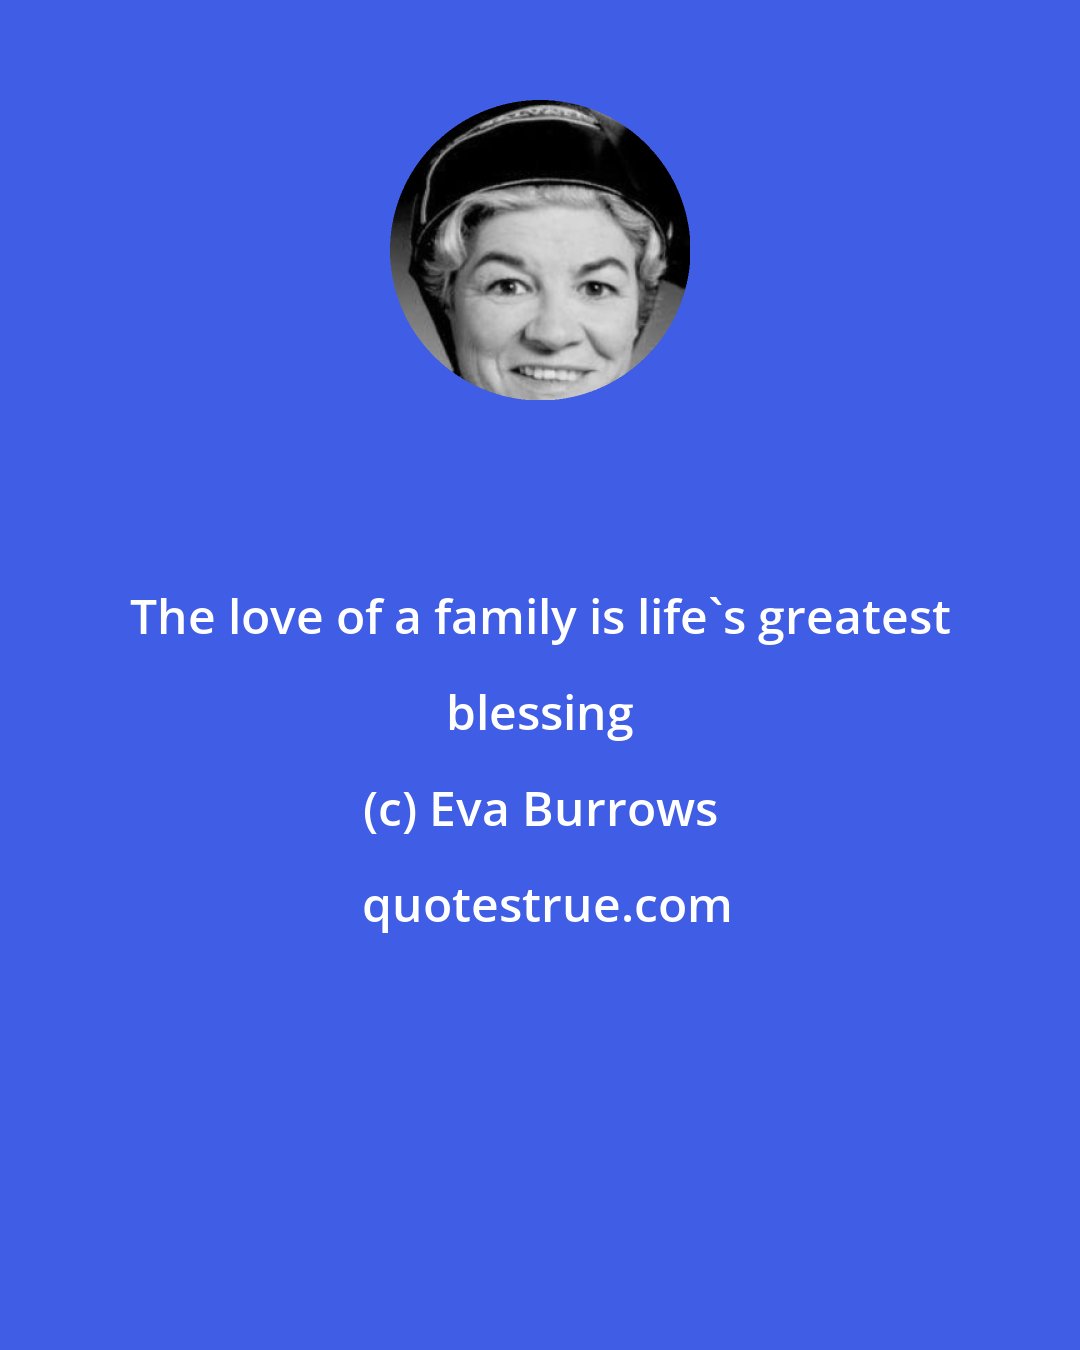 Eva Burrows: The love of a family is life's greatest blessing